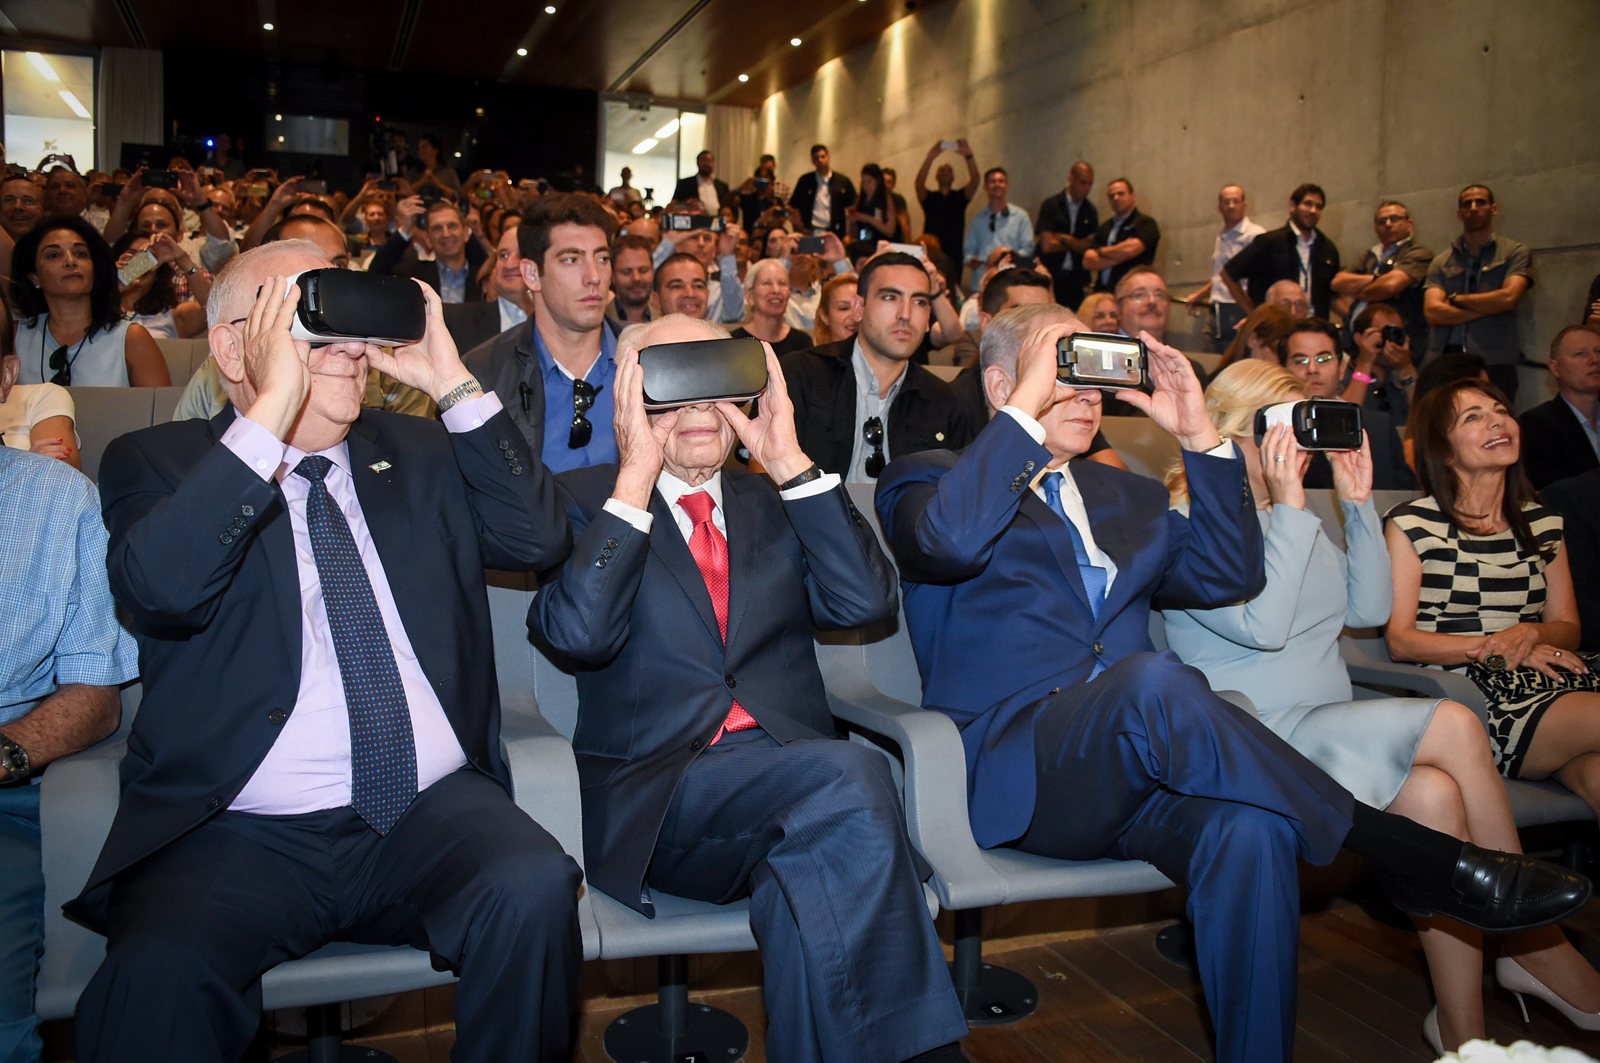 Israeli Prime Minister Benjamin Netanyahu, President Reuven Rivlin and former President Shimon Peres at the launch of the new Israeli innovation museum center, which will be established at the Peres Center for Peace. Photo by Yair Sagi/POOL